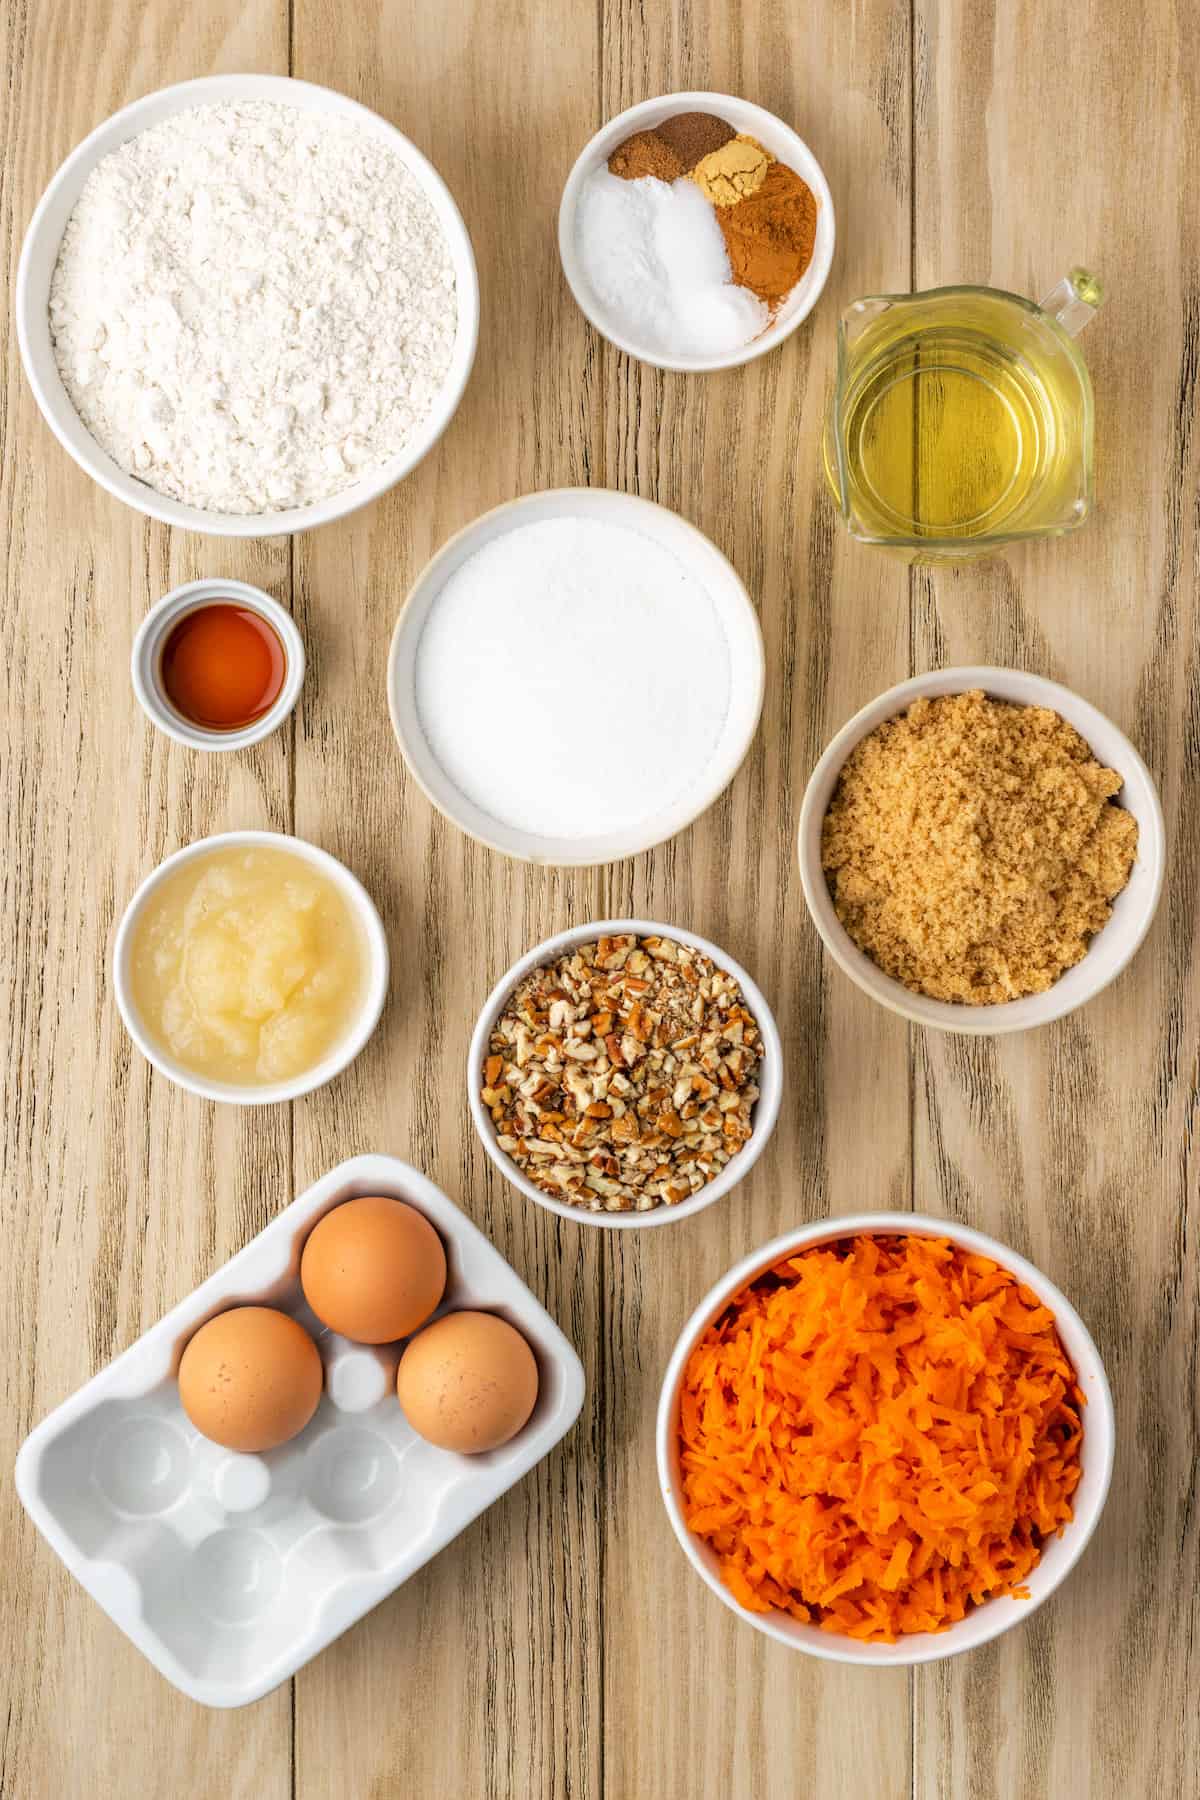 The ingredients for homemade gluten-free carrot cake.